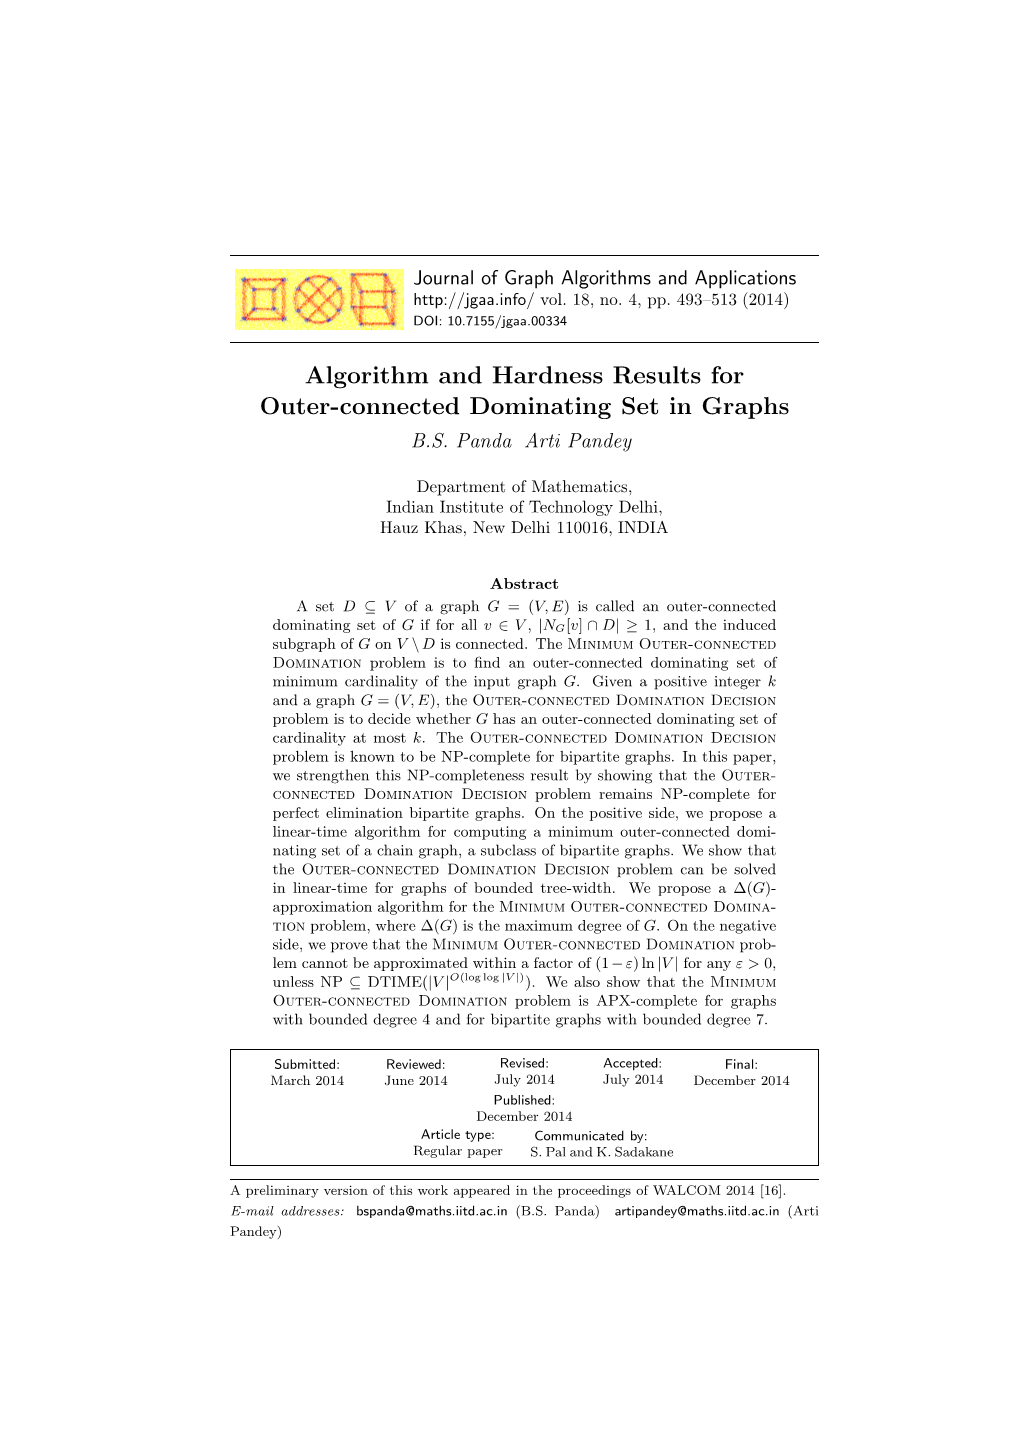 Algorithm and Hardness Results for Outer-Connected Dominating Set in Graphs B.S